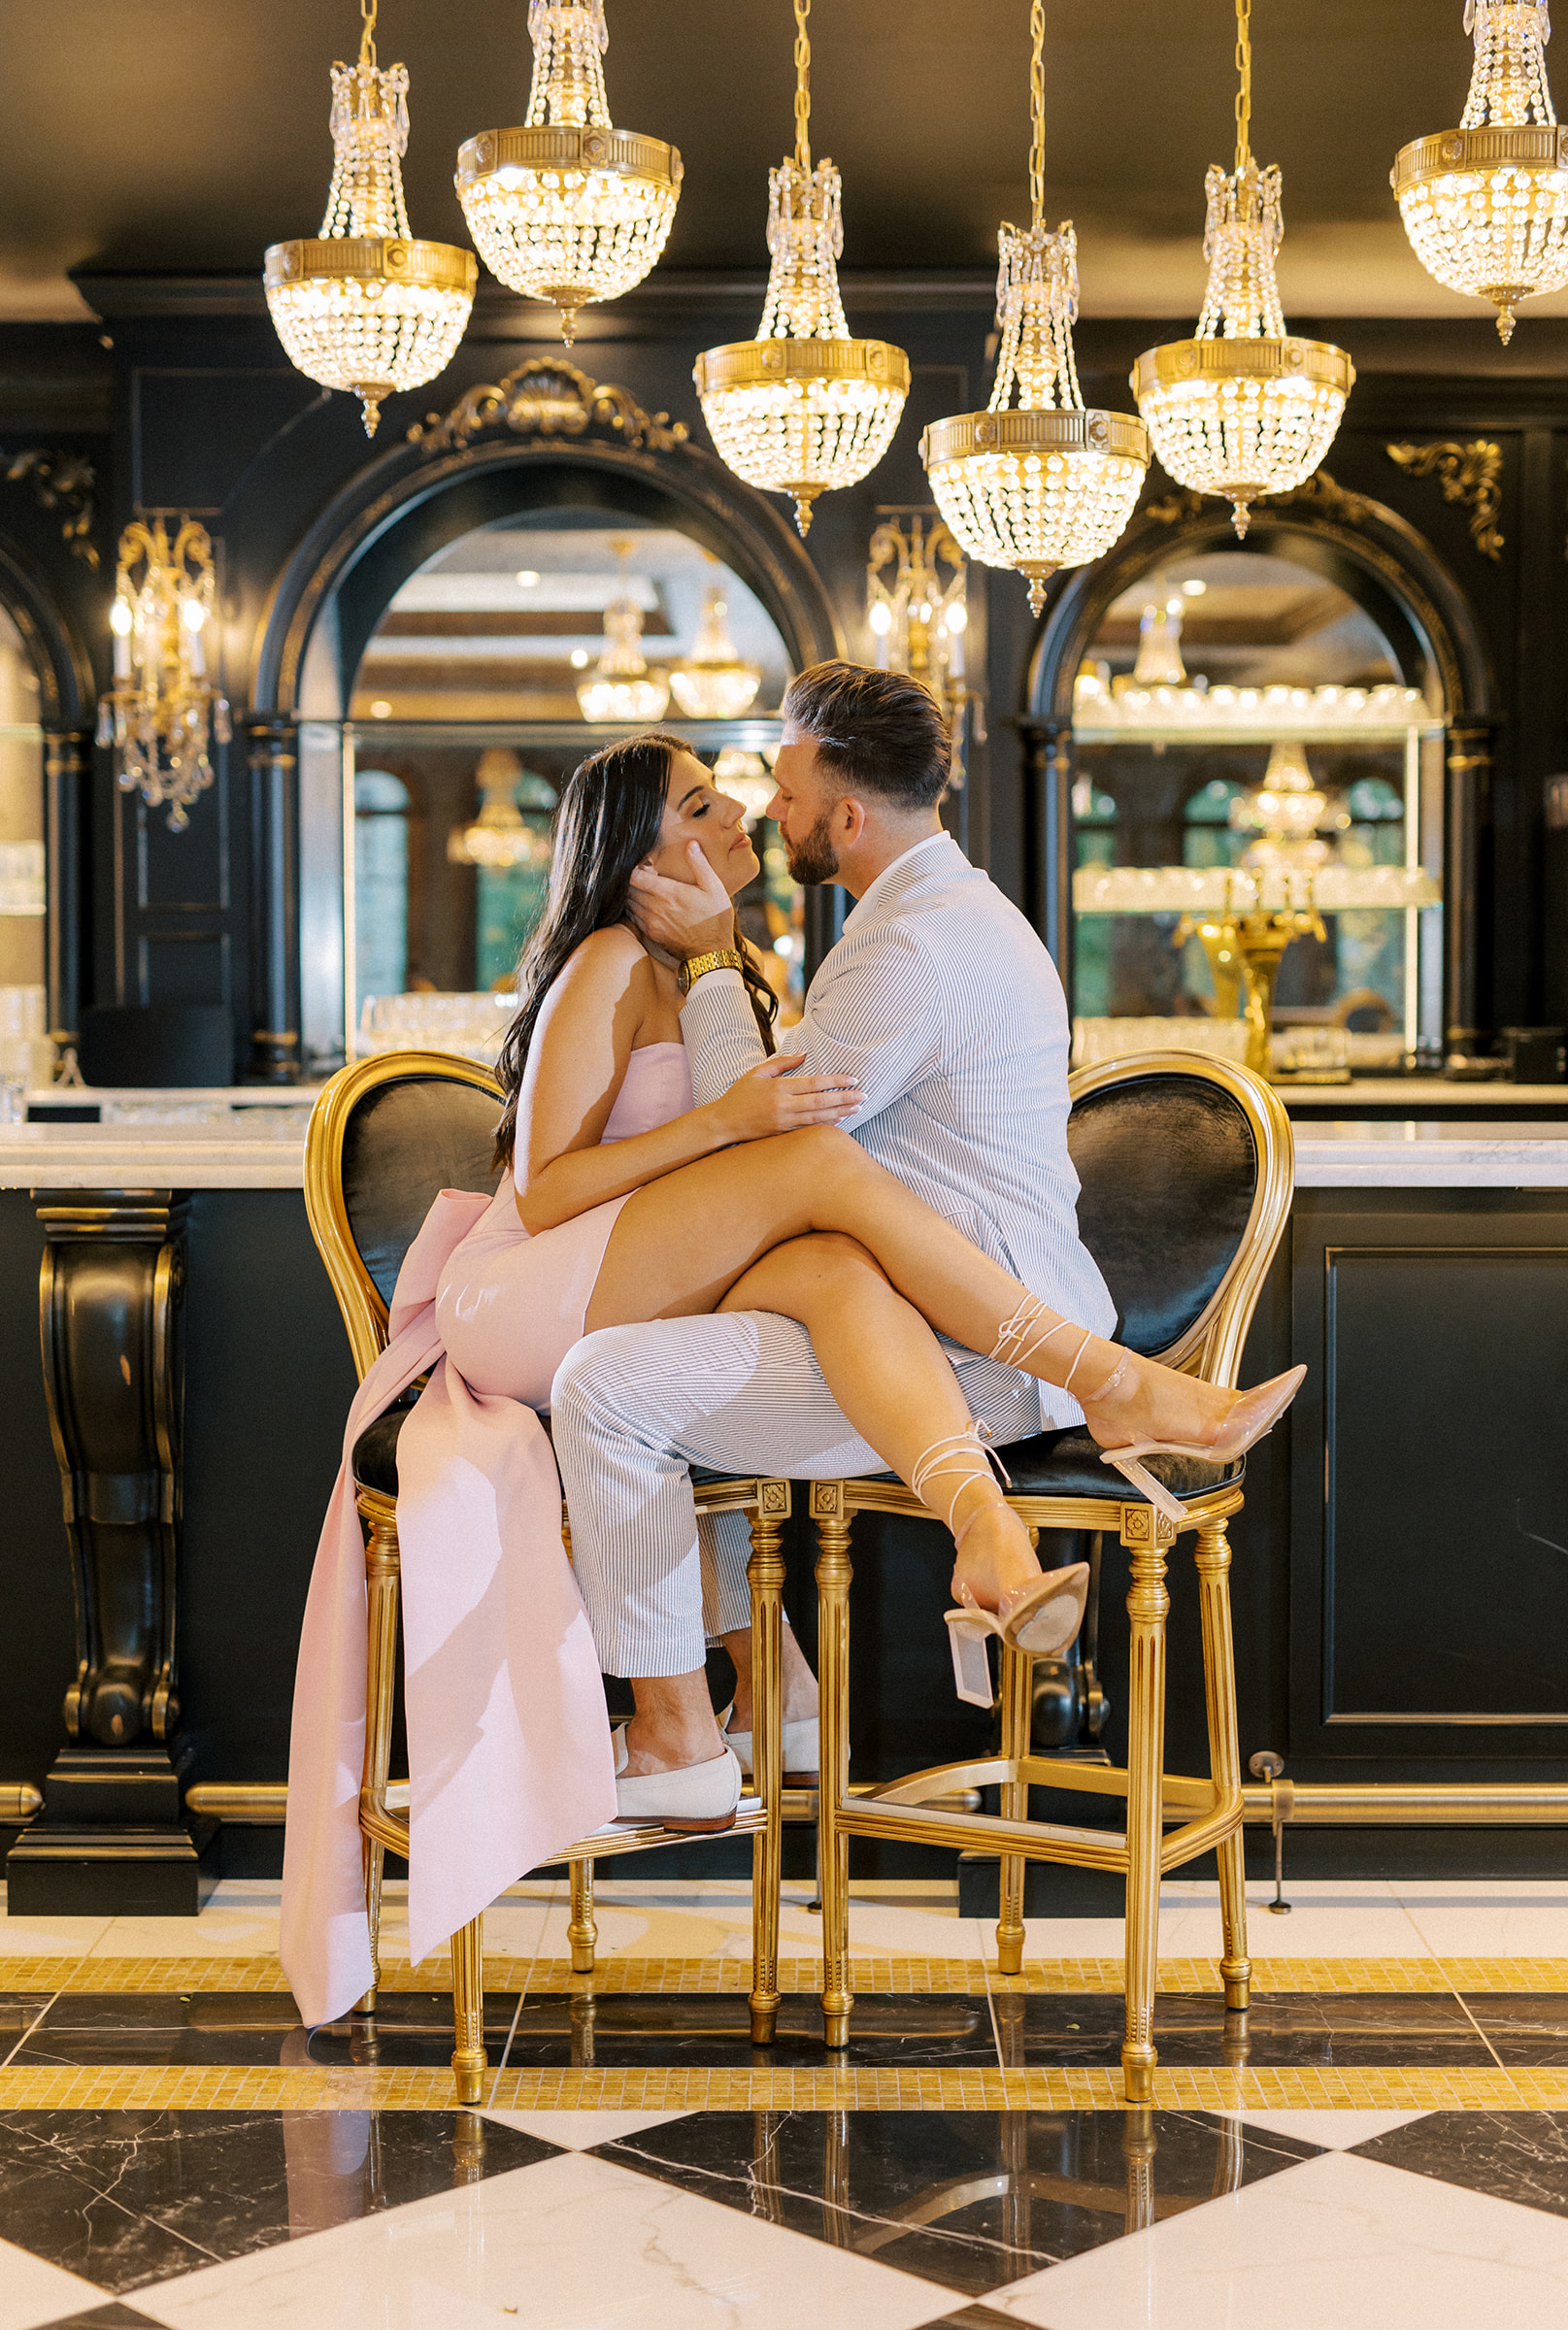 A classy & chic engagement photo session at the Willows at Ashcombe Mansion